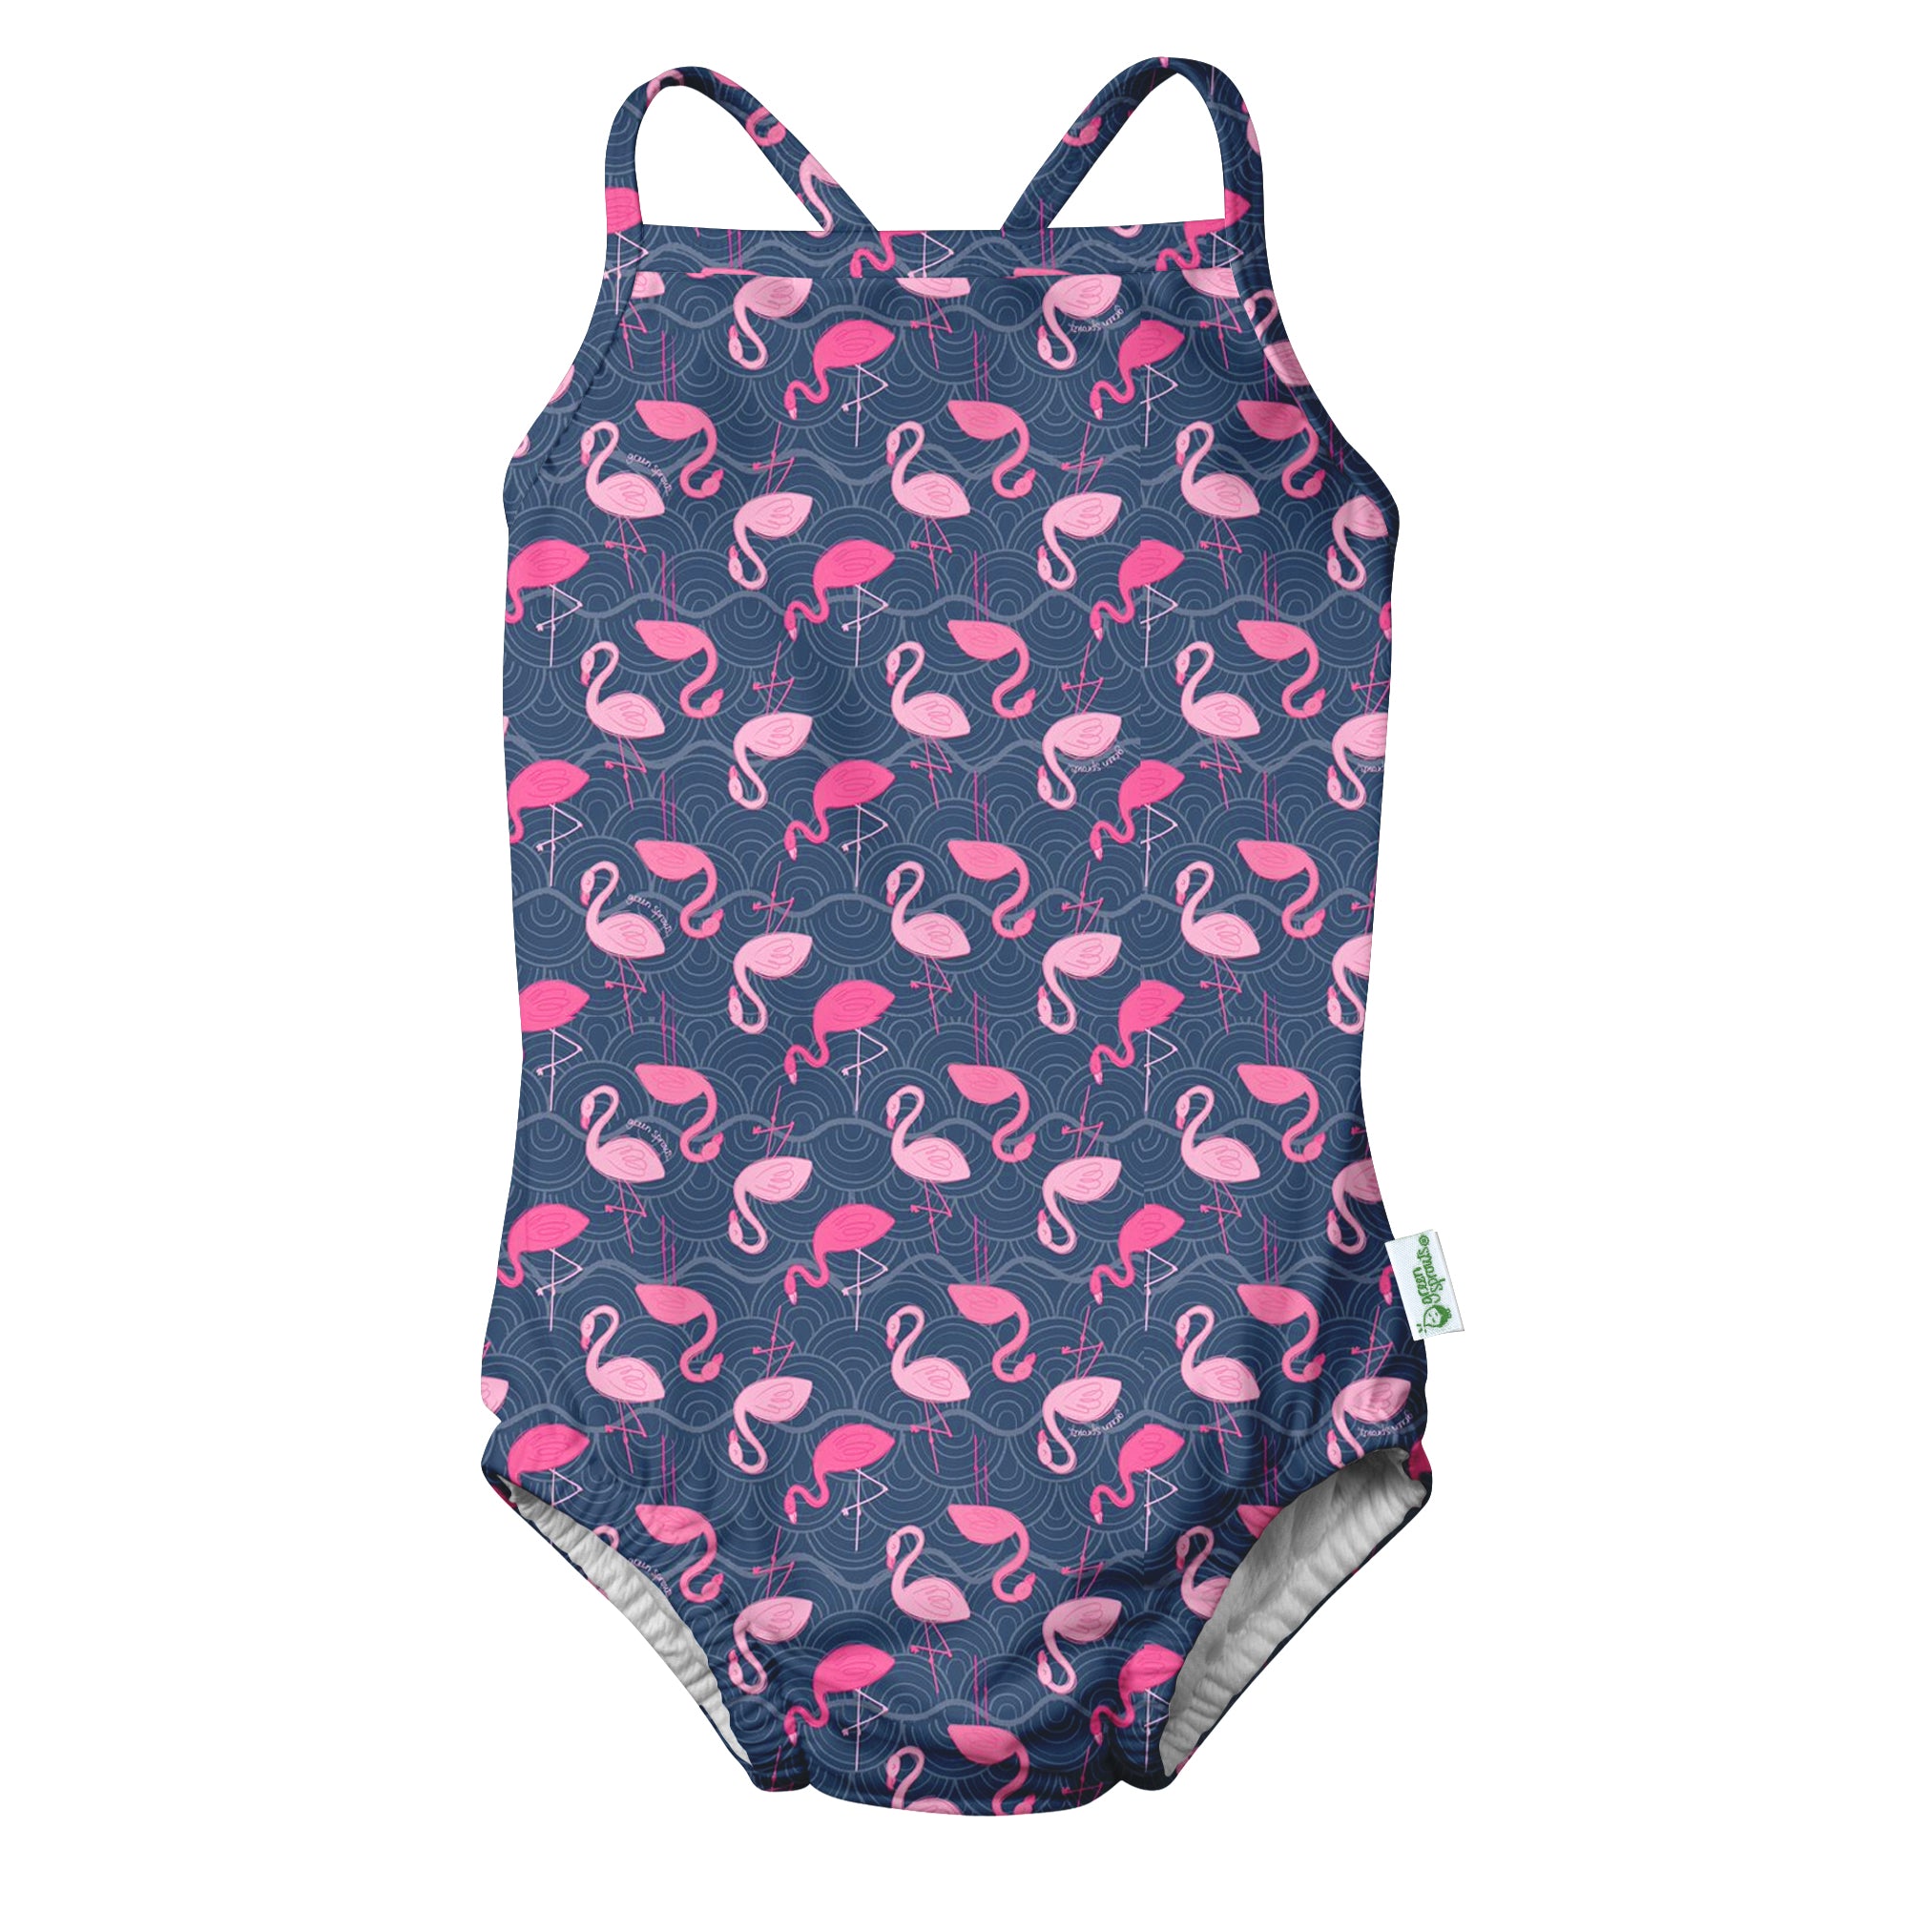  2 Piece Swimsuit, Soft Washable Breathable Striped